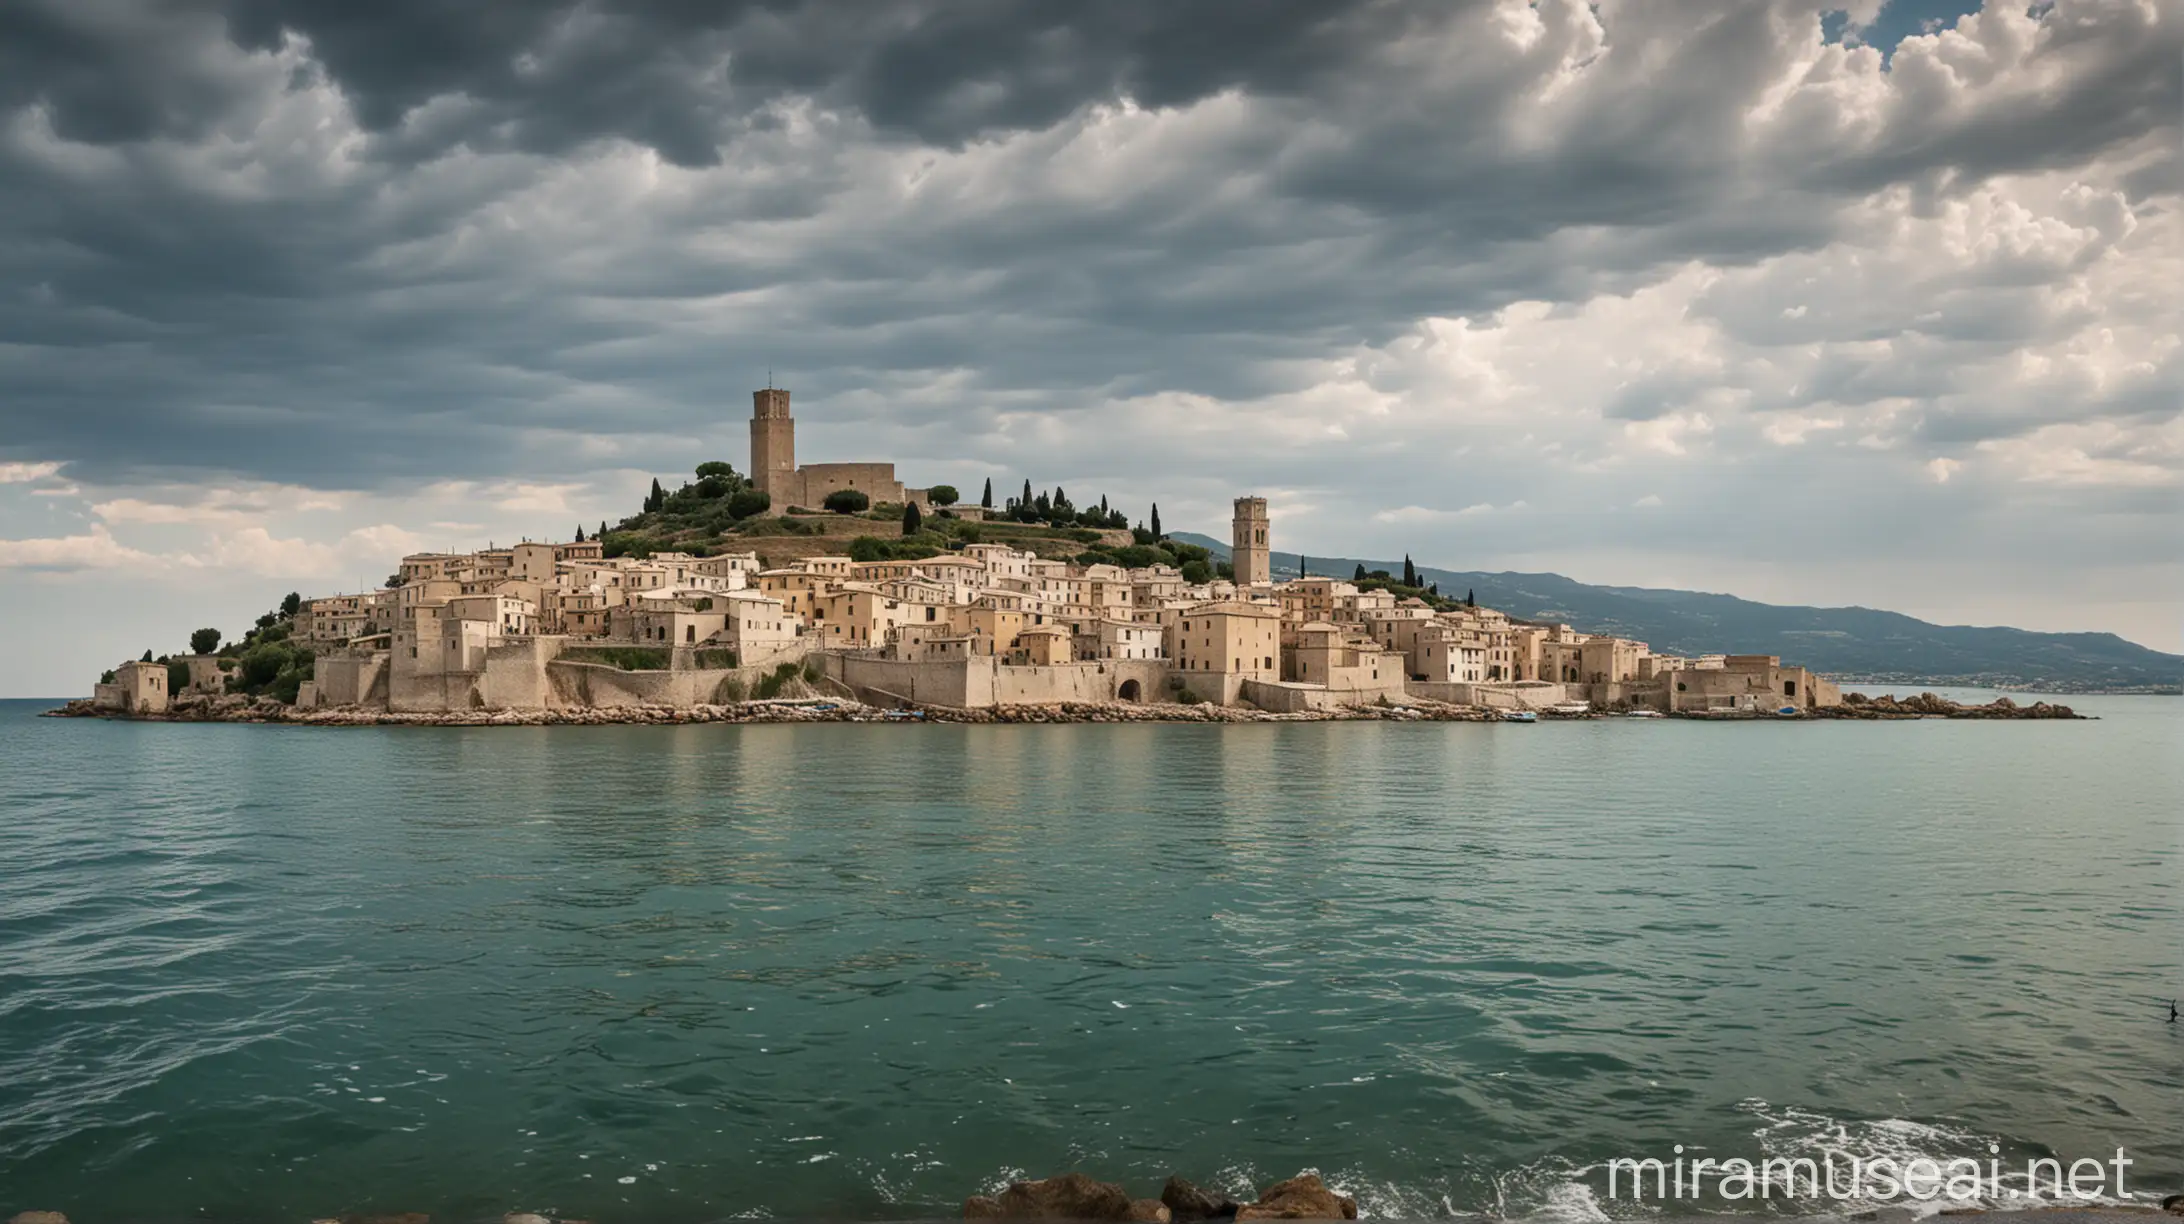 Scenic View Coastal Italian Village with Tower and Fishermens Dwellings